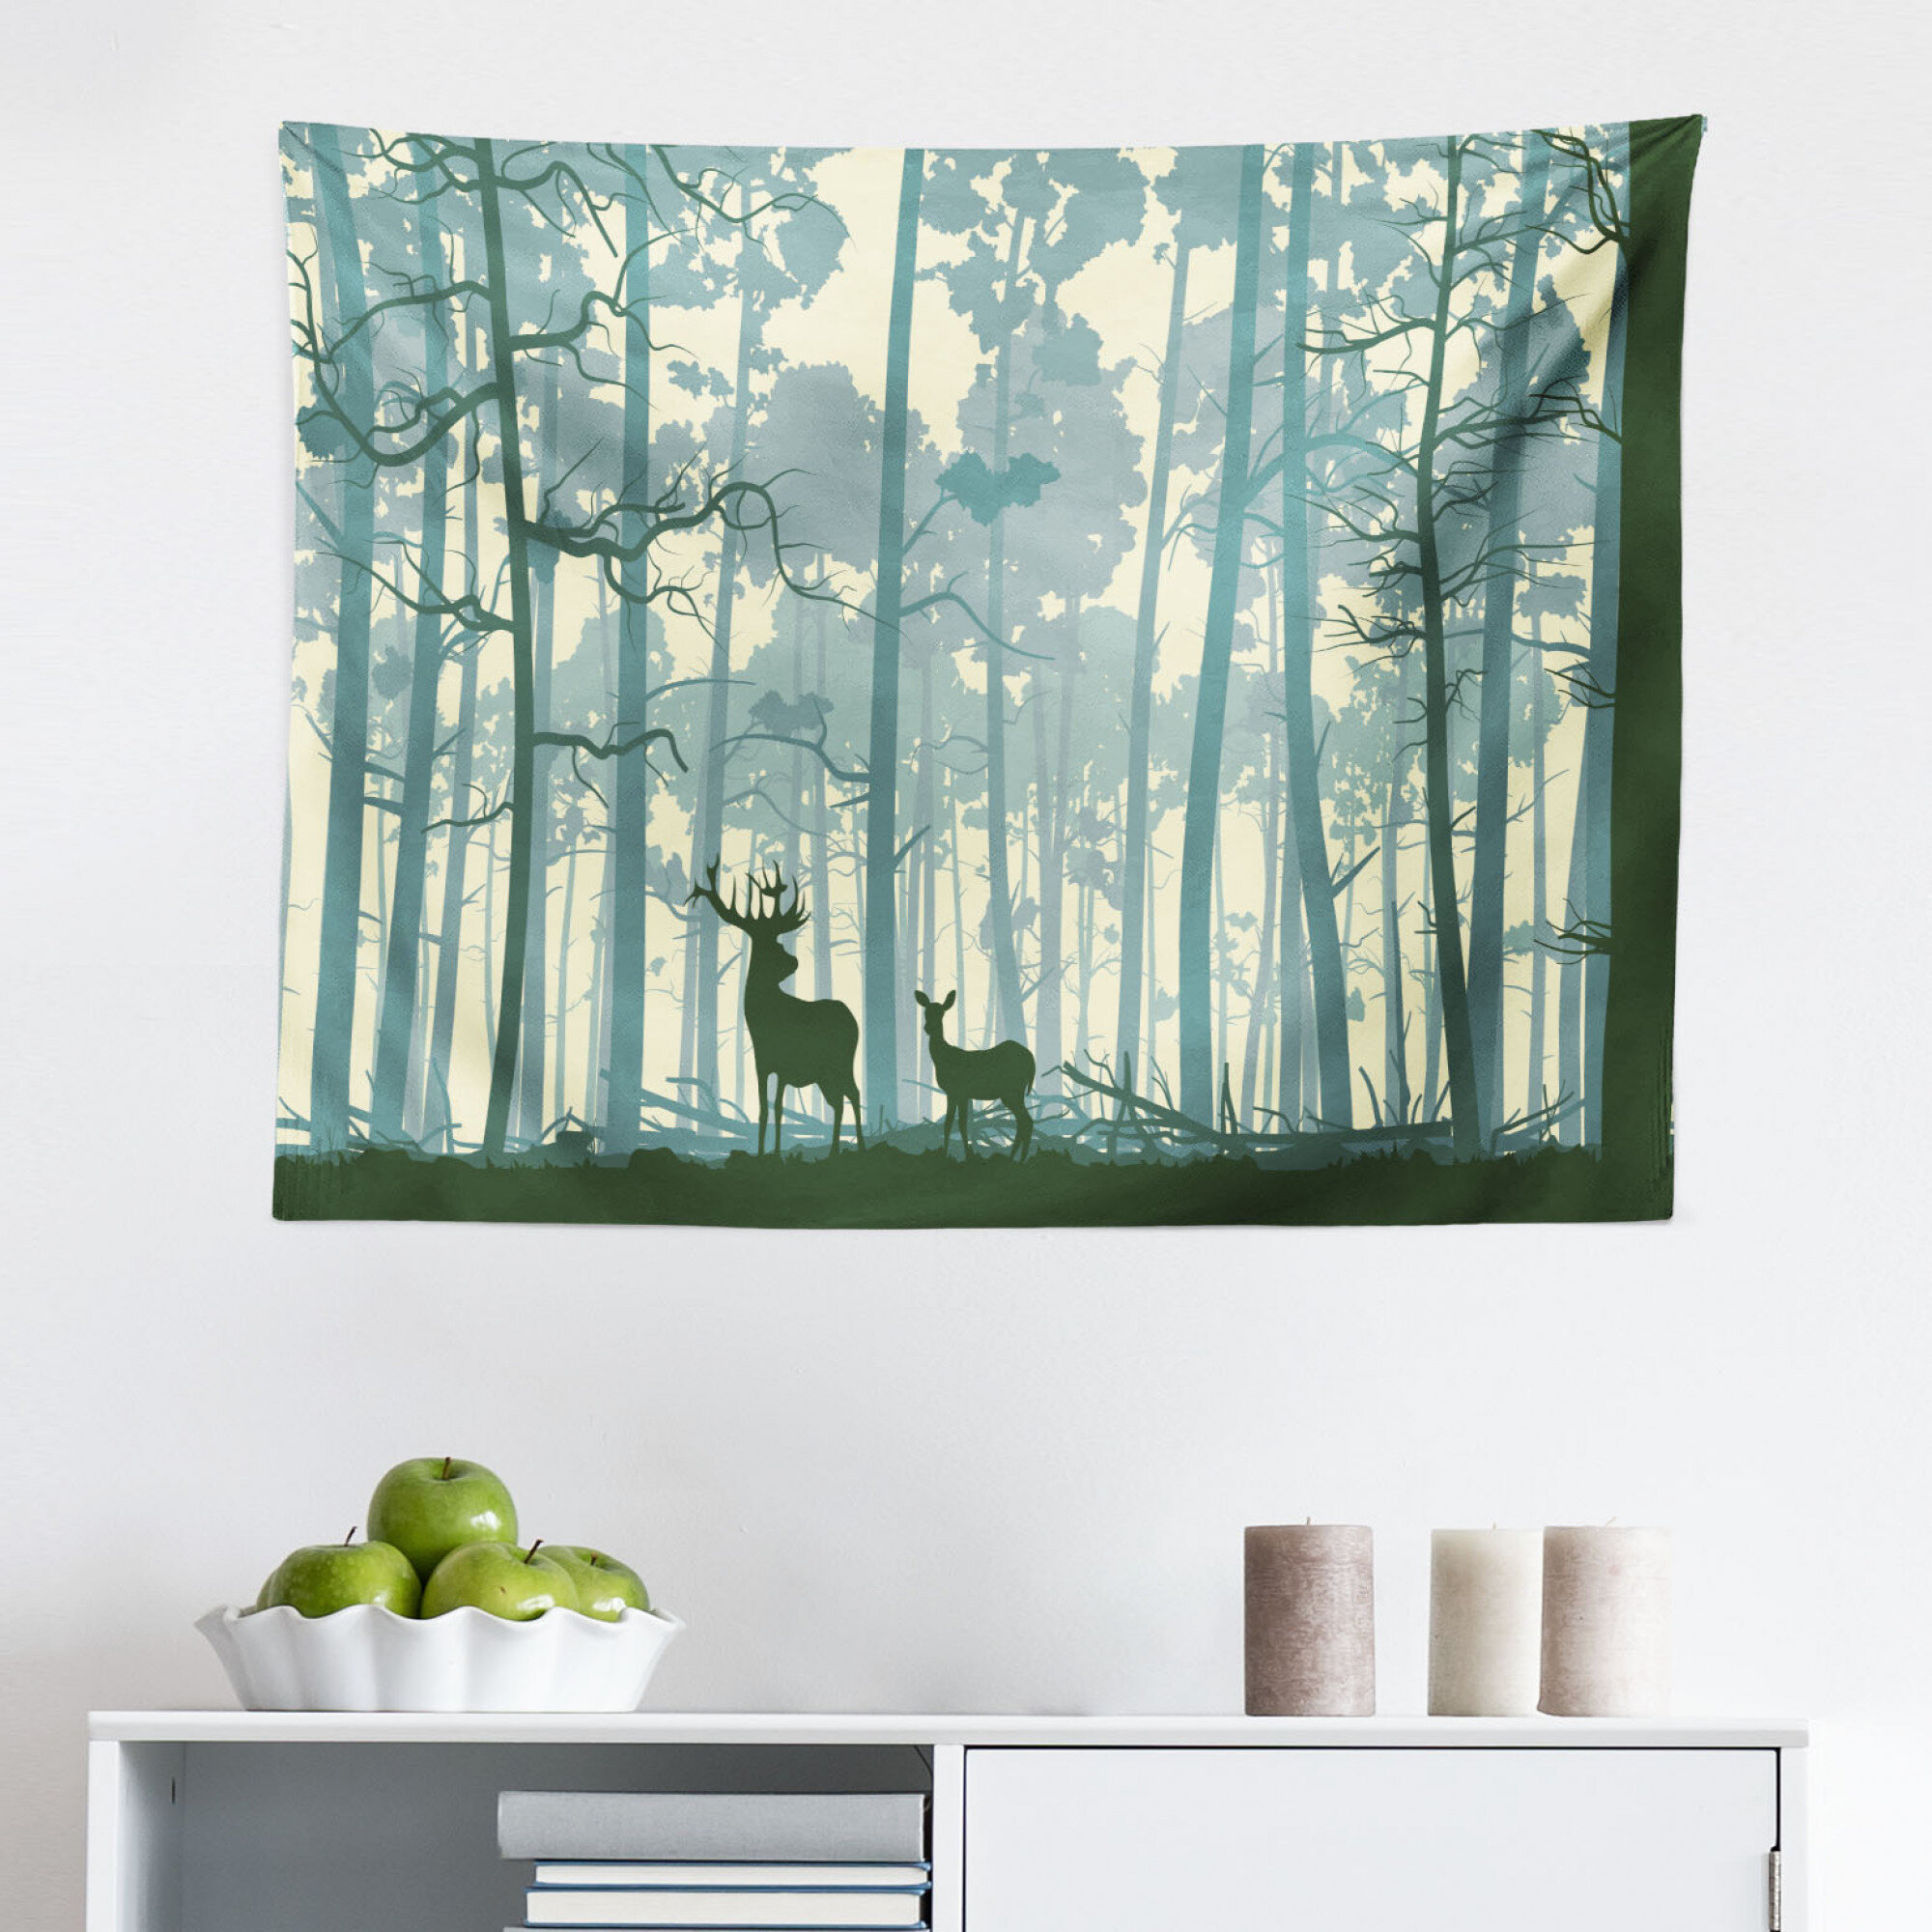 East Urban Home Ambesonne Deer Tapestry, Animal Silhouette In Foggy Forest  Animals In Nature Themed Cartoon Dusk Art, Fabric Wall Hanging Decor For  Bedroom Living Room Dorm, 28